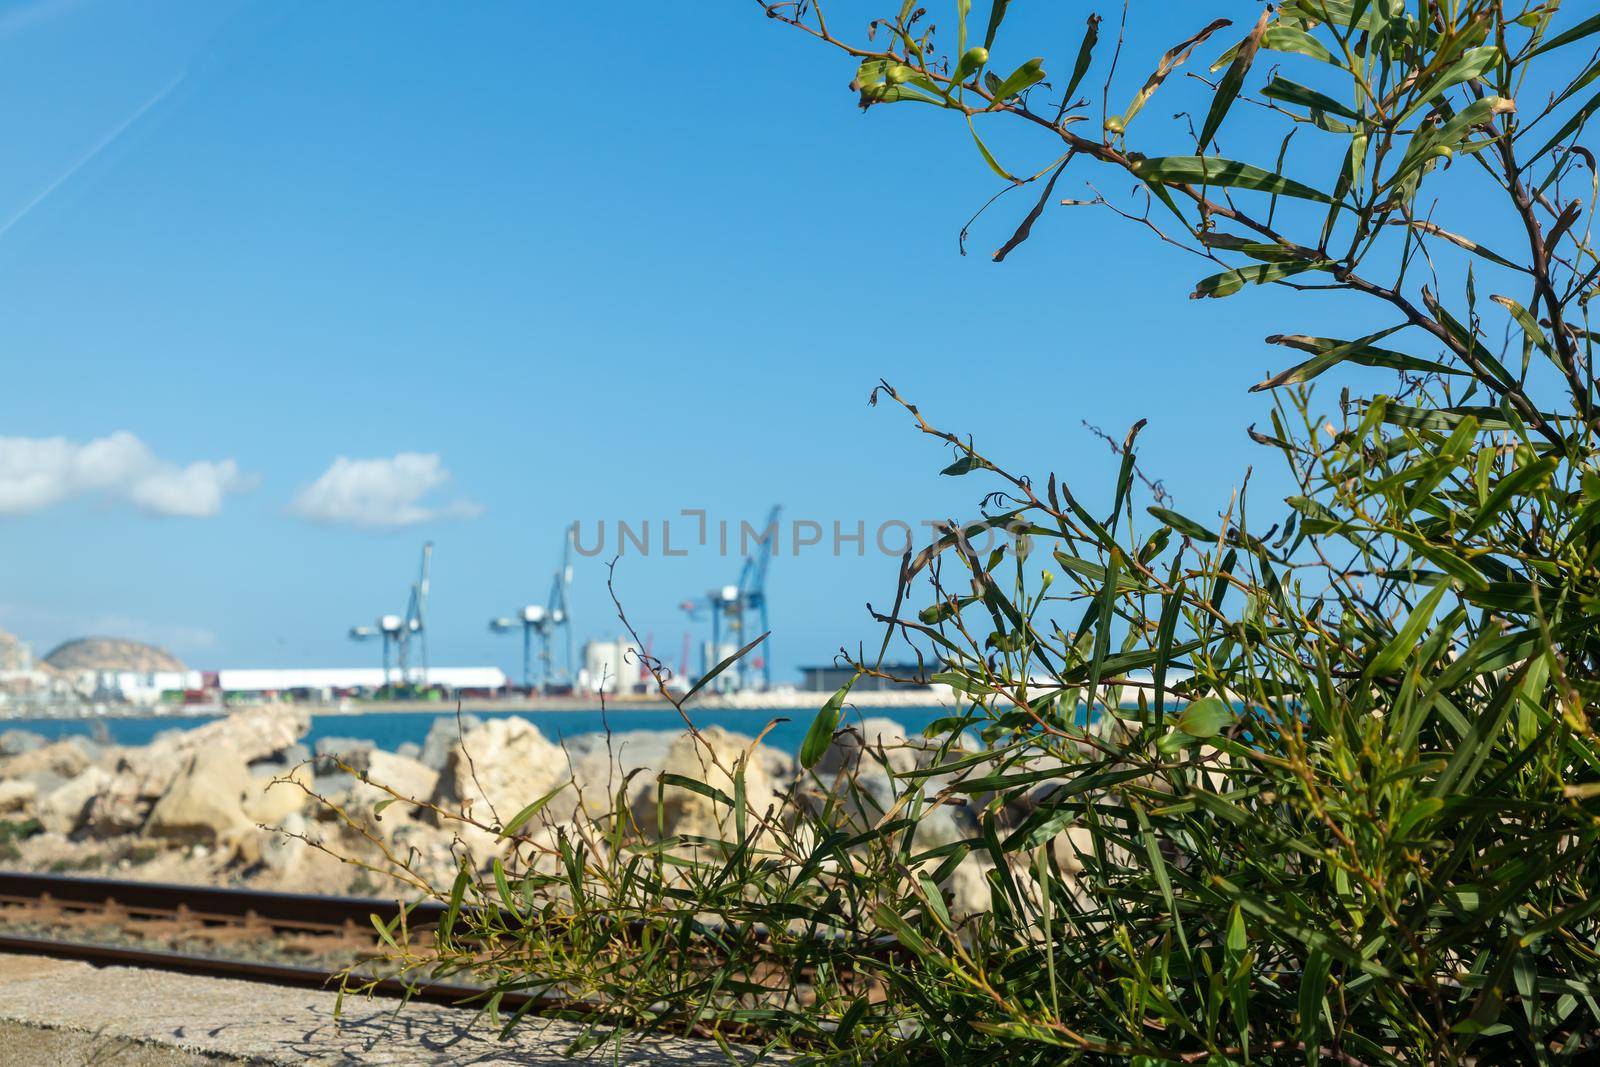 The seashore through the bushes, a commercial port and port cranes on the horizon. Summer Mediterranean Sea by Milanchikov